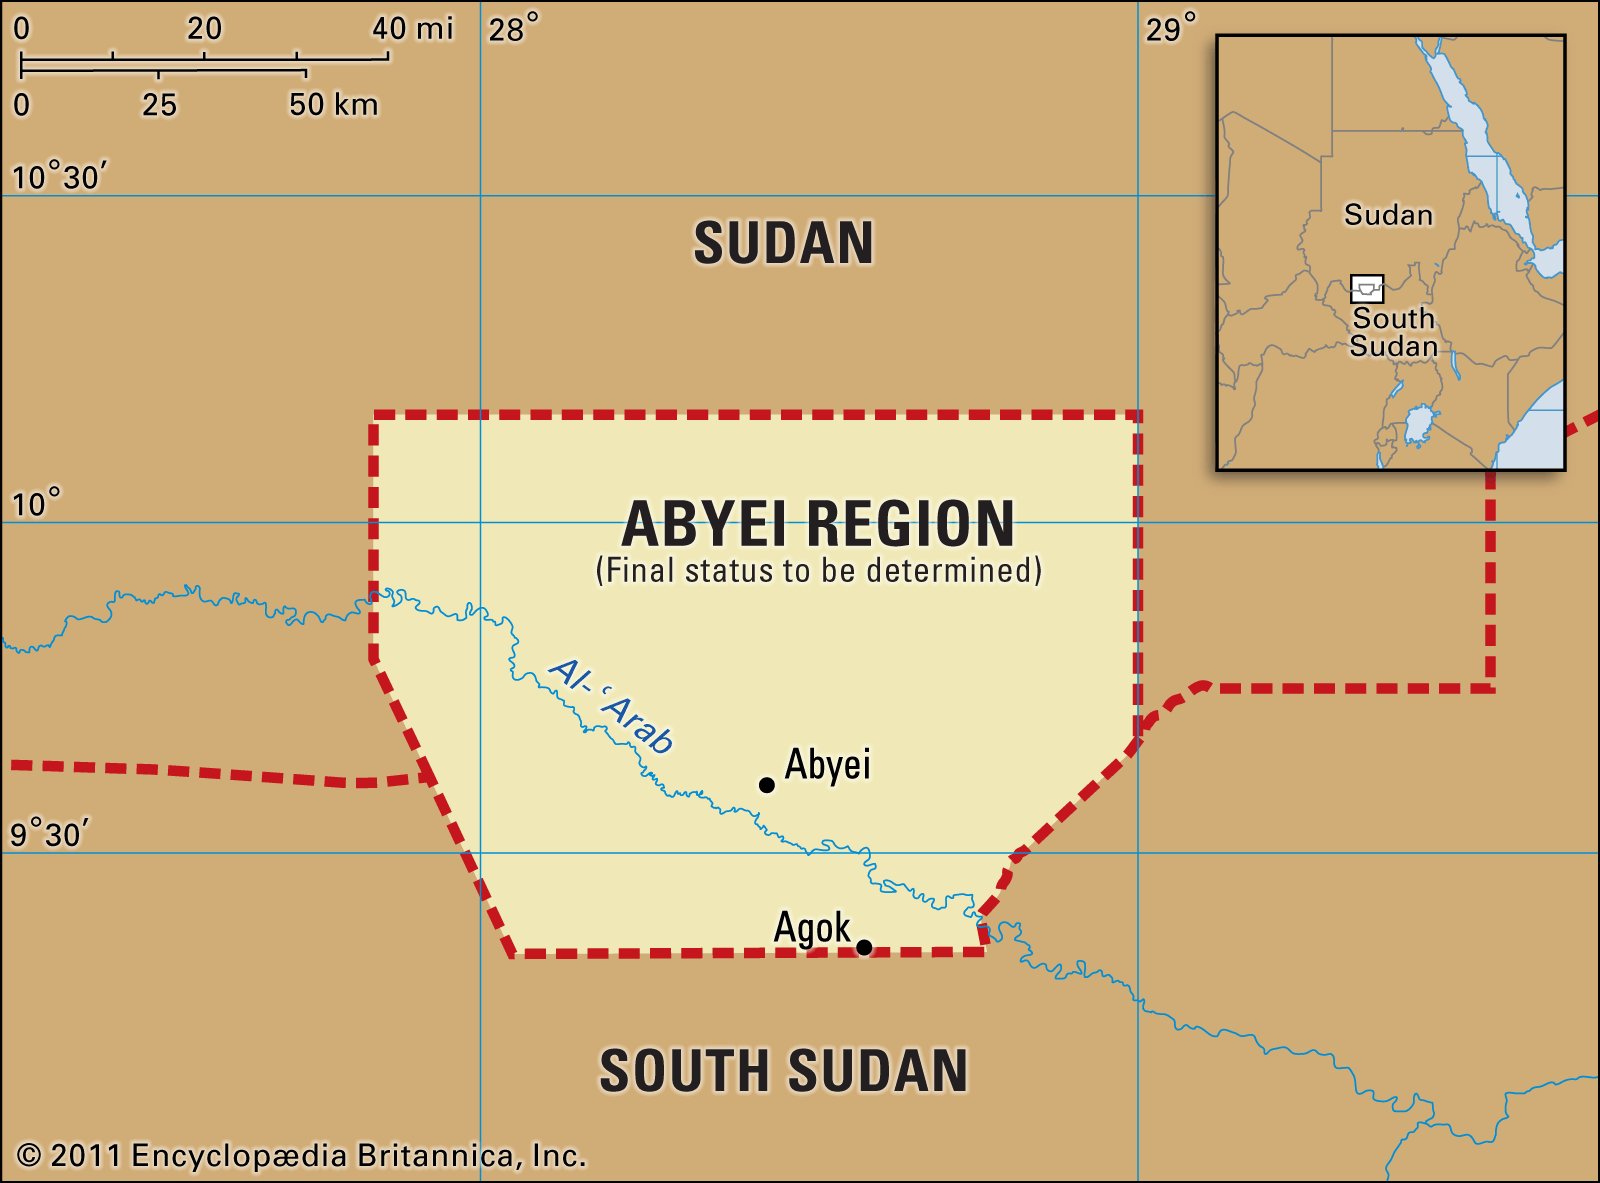 Kiir forms committee to initiate dialogue over Abyei status